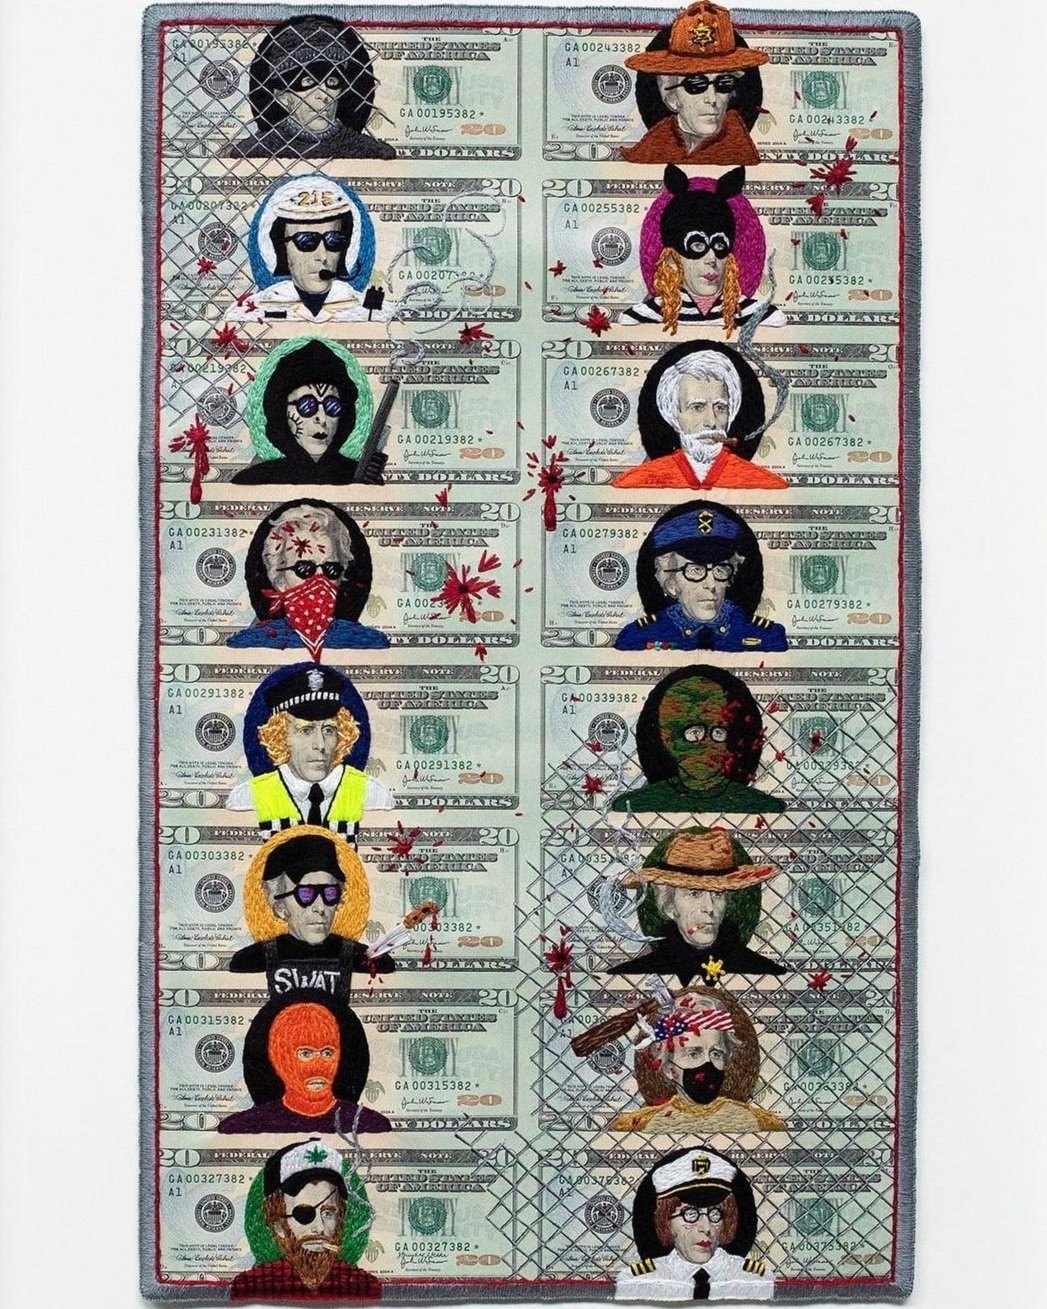 Cops &amp; Robbers, 2022, hand stitched on uncut sheet of US twenties, 27 x 18.5 in